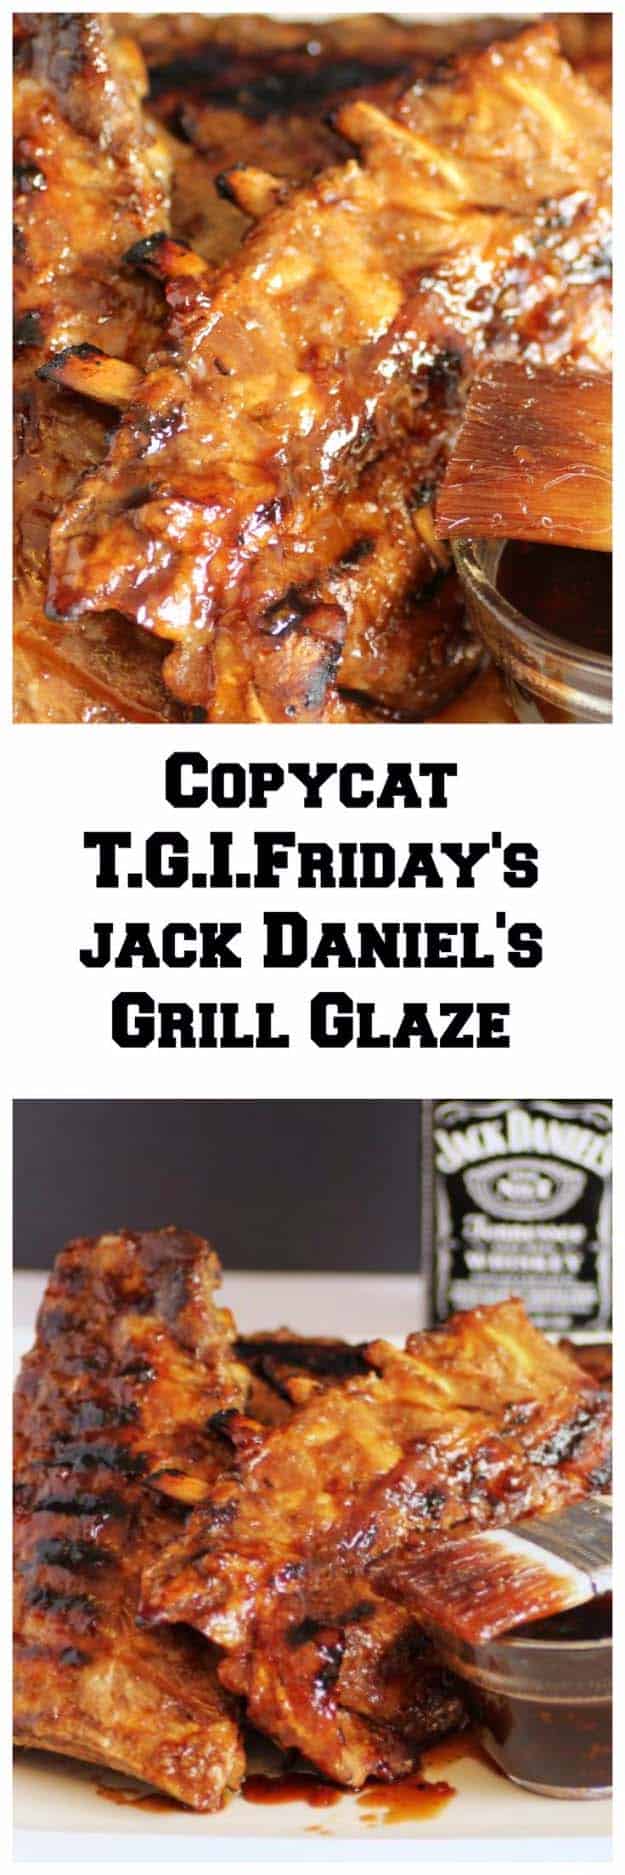 Fun DIY Ideas Made With Jack Daniels - Recipes, Projects and Crafts With The Bottle, Everything From Lamps and Decorations to Fudge and Cupcakes | T.G.I. Fridays Jack Daniels Grill Glaze #diy #jackdaniels #recipes #crafts